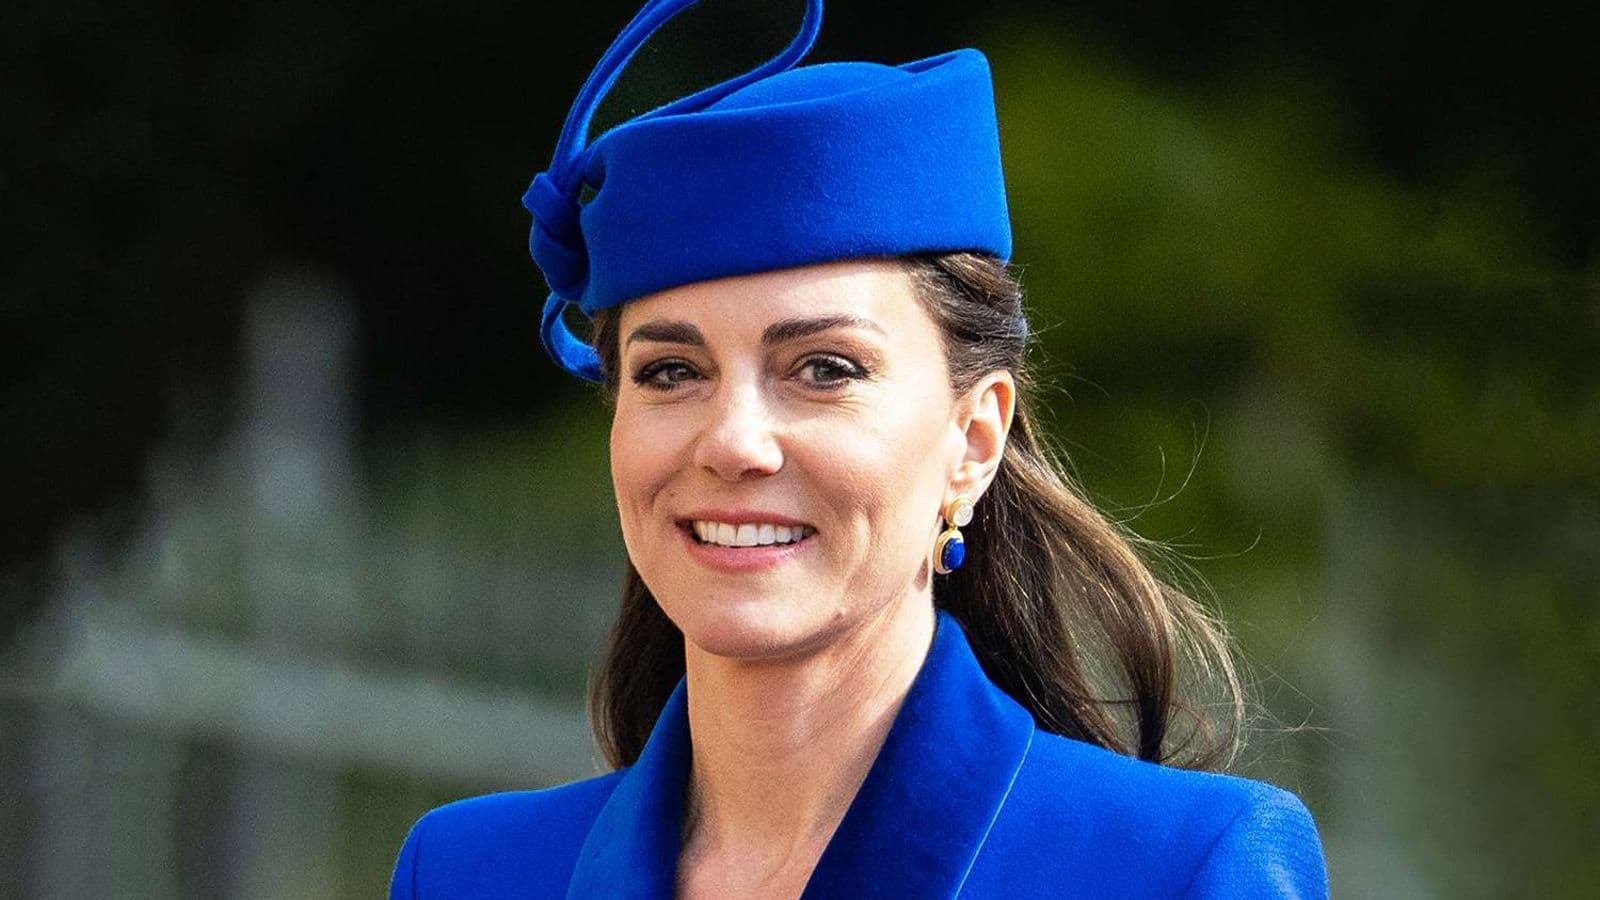 London hospital staff 'tried to access' Kate Middleton's medical records 